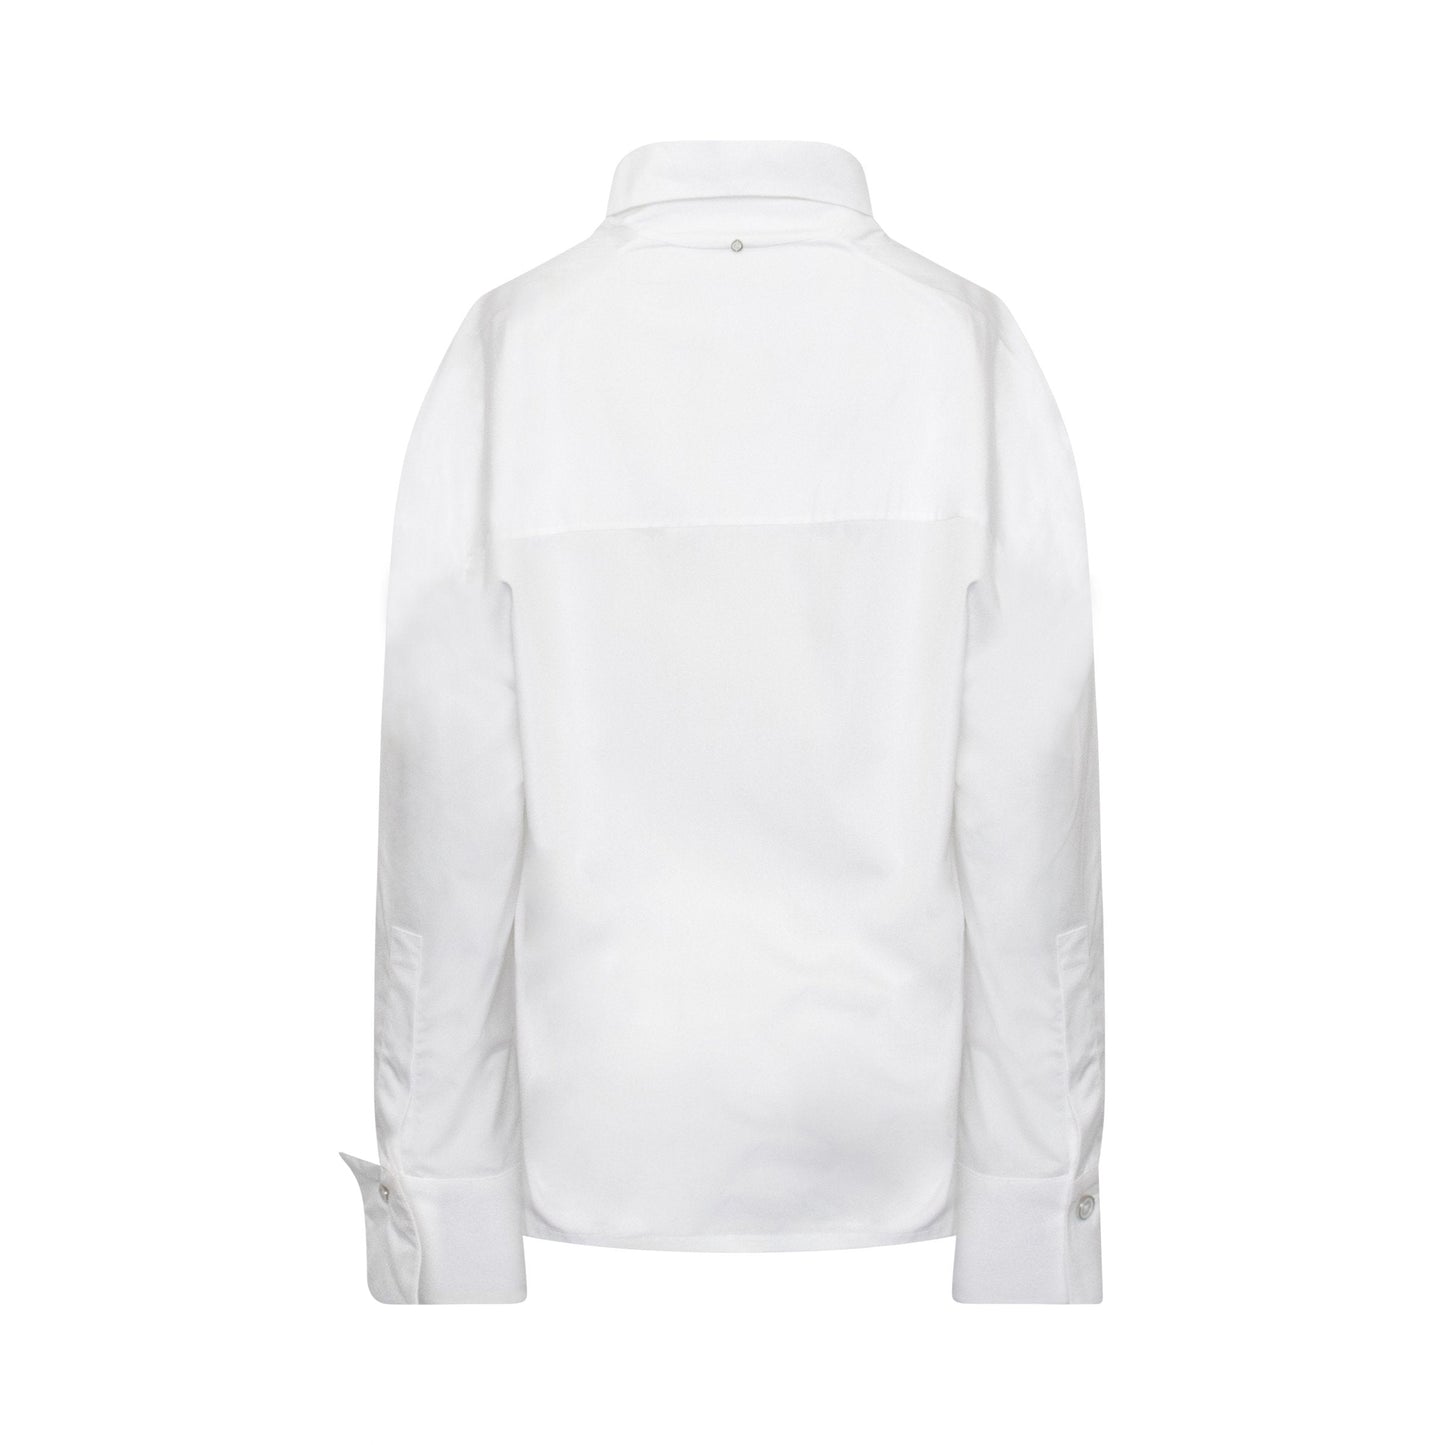 Oversized Shirt With Drapped Collar in White